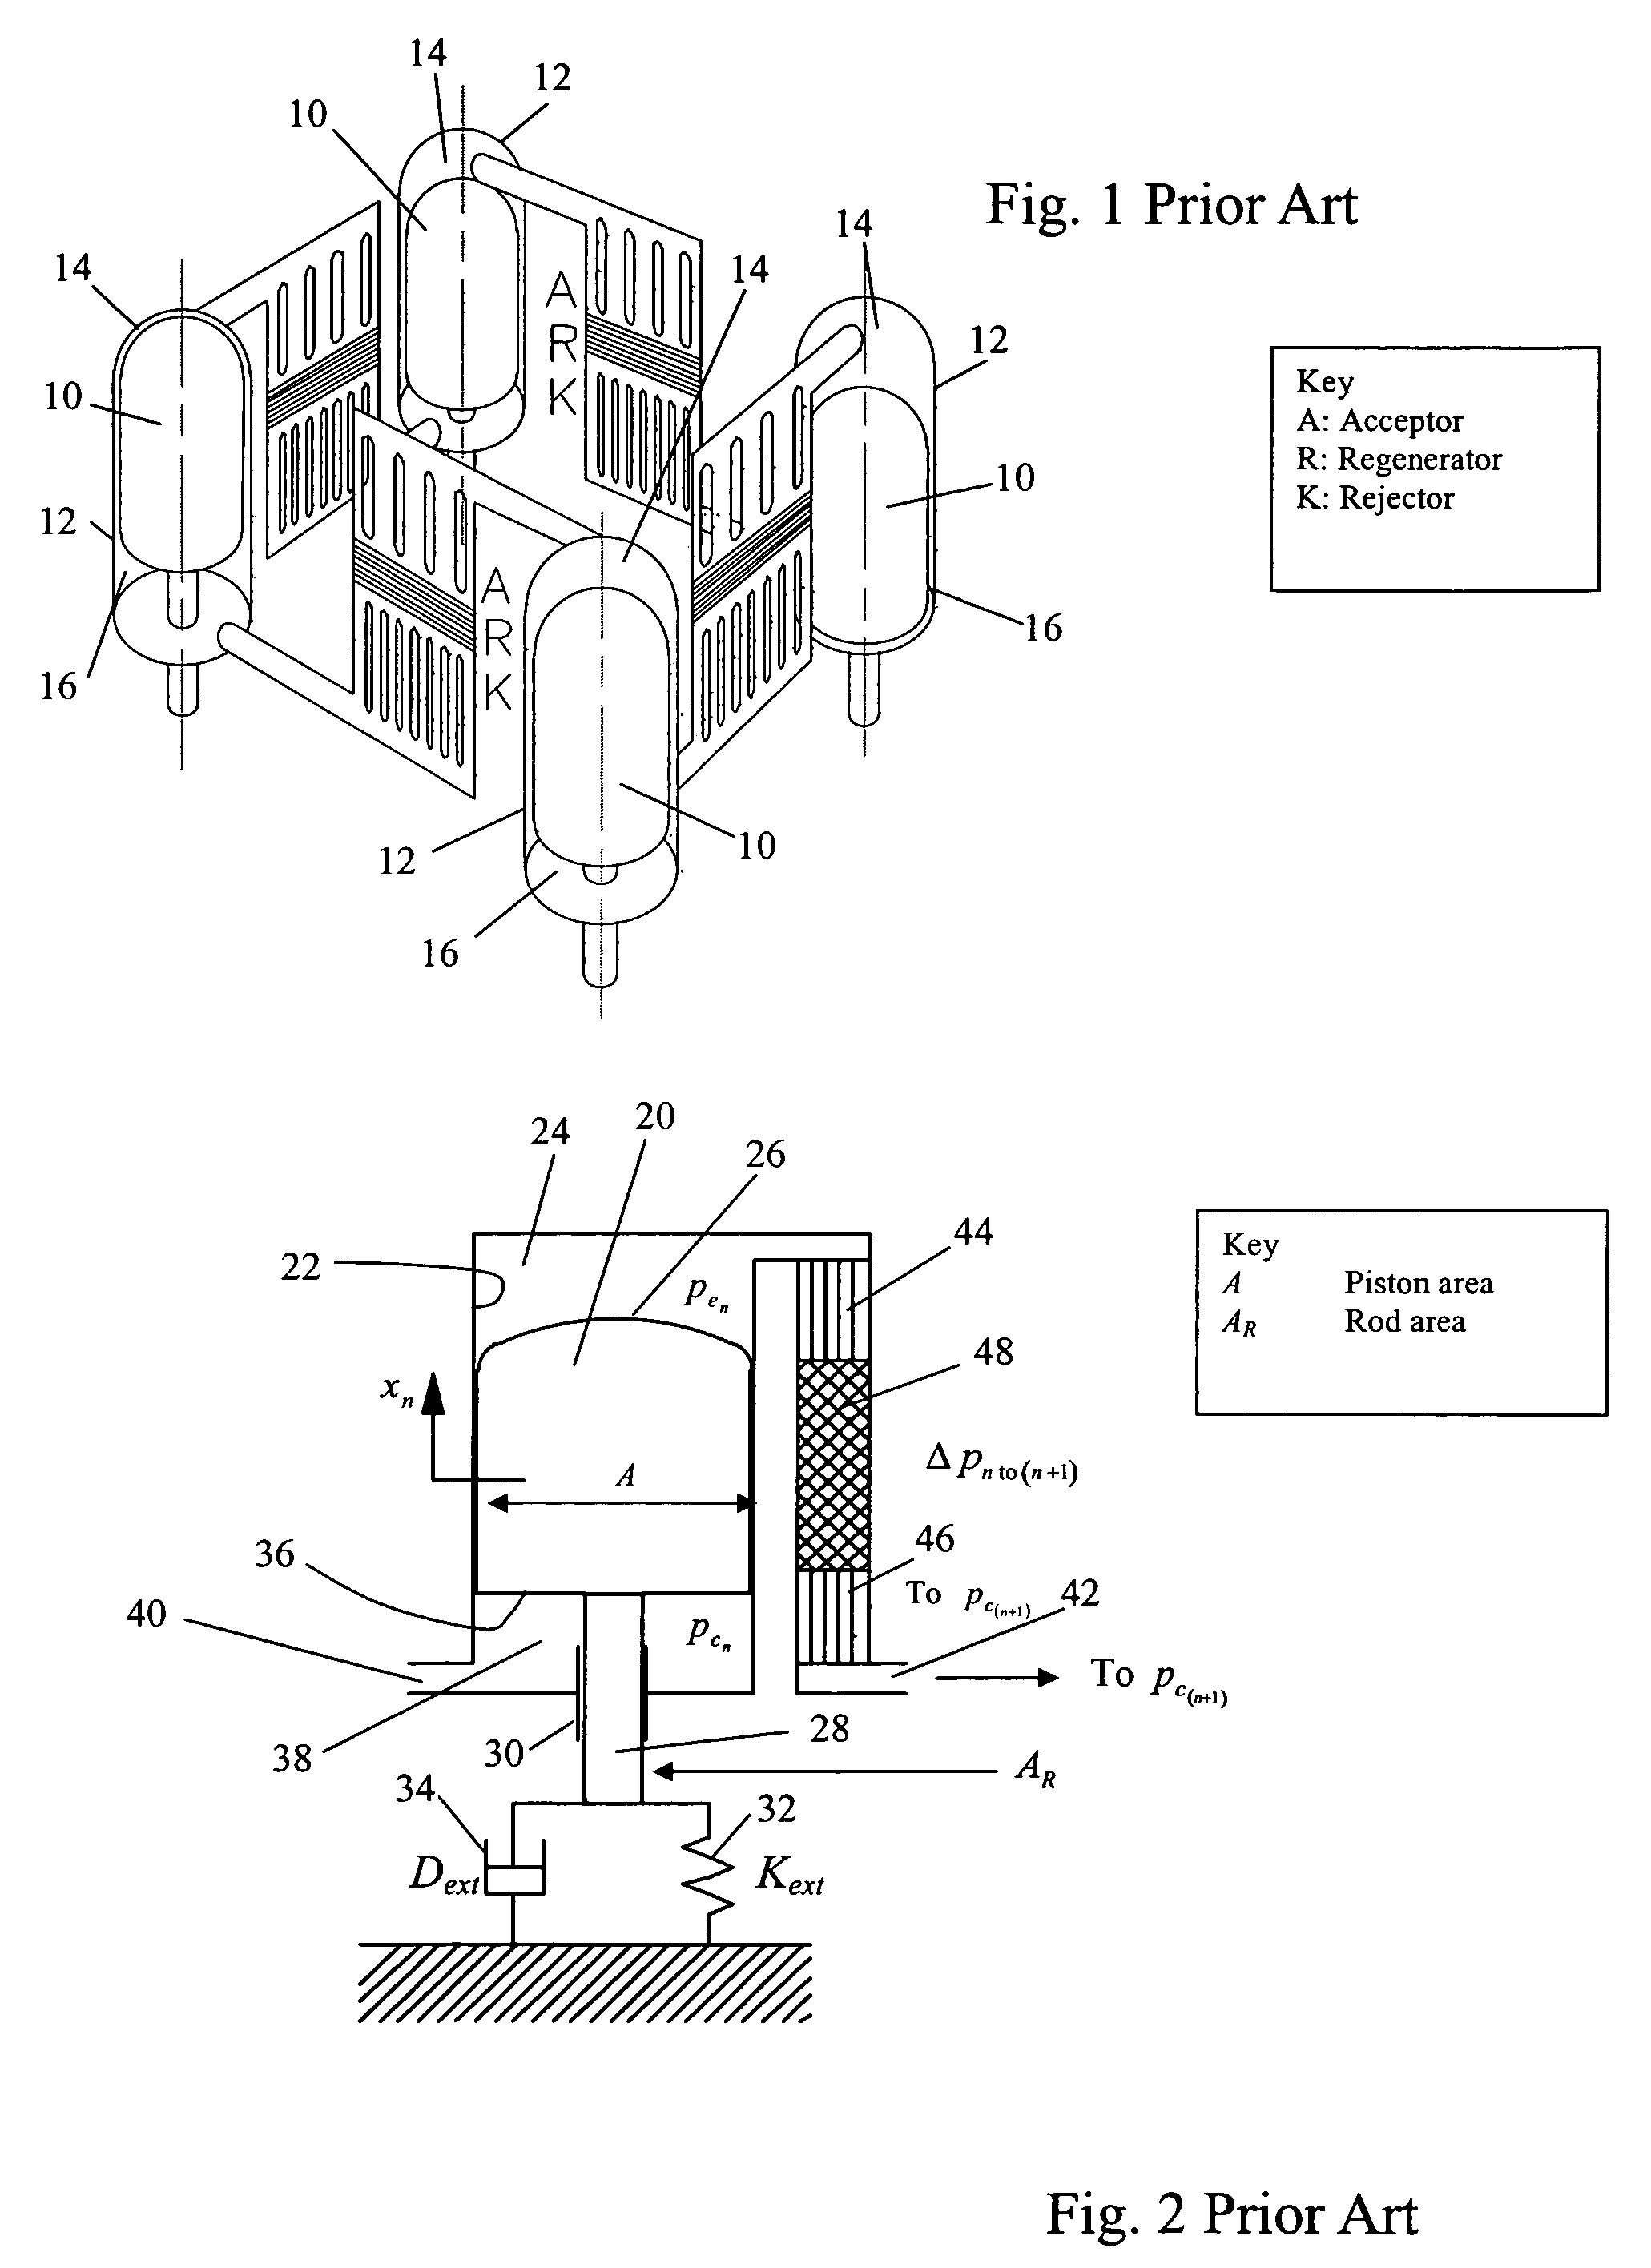 Multiple-cylinder, free-piston, alpha configured stirling engines and heat pumps with stepped pistons